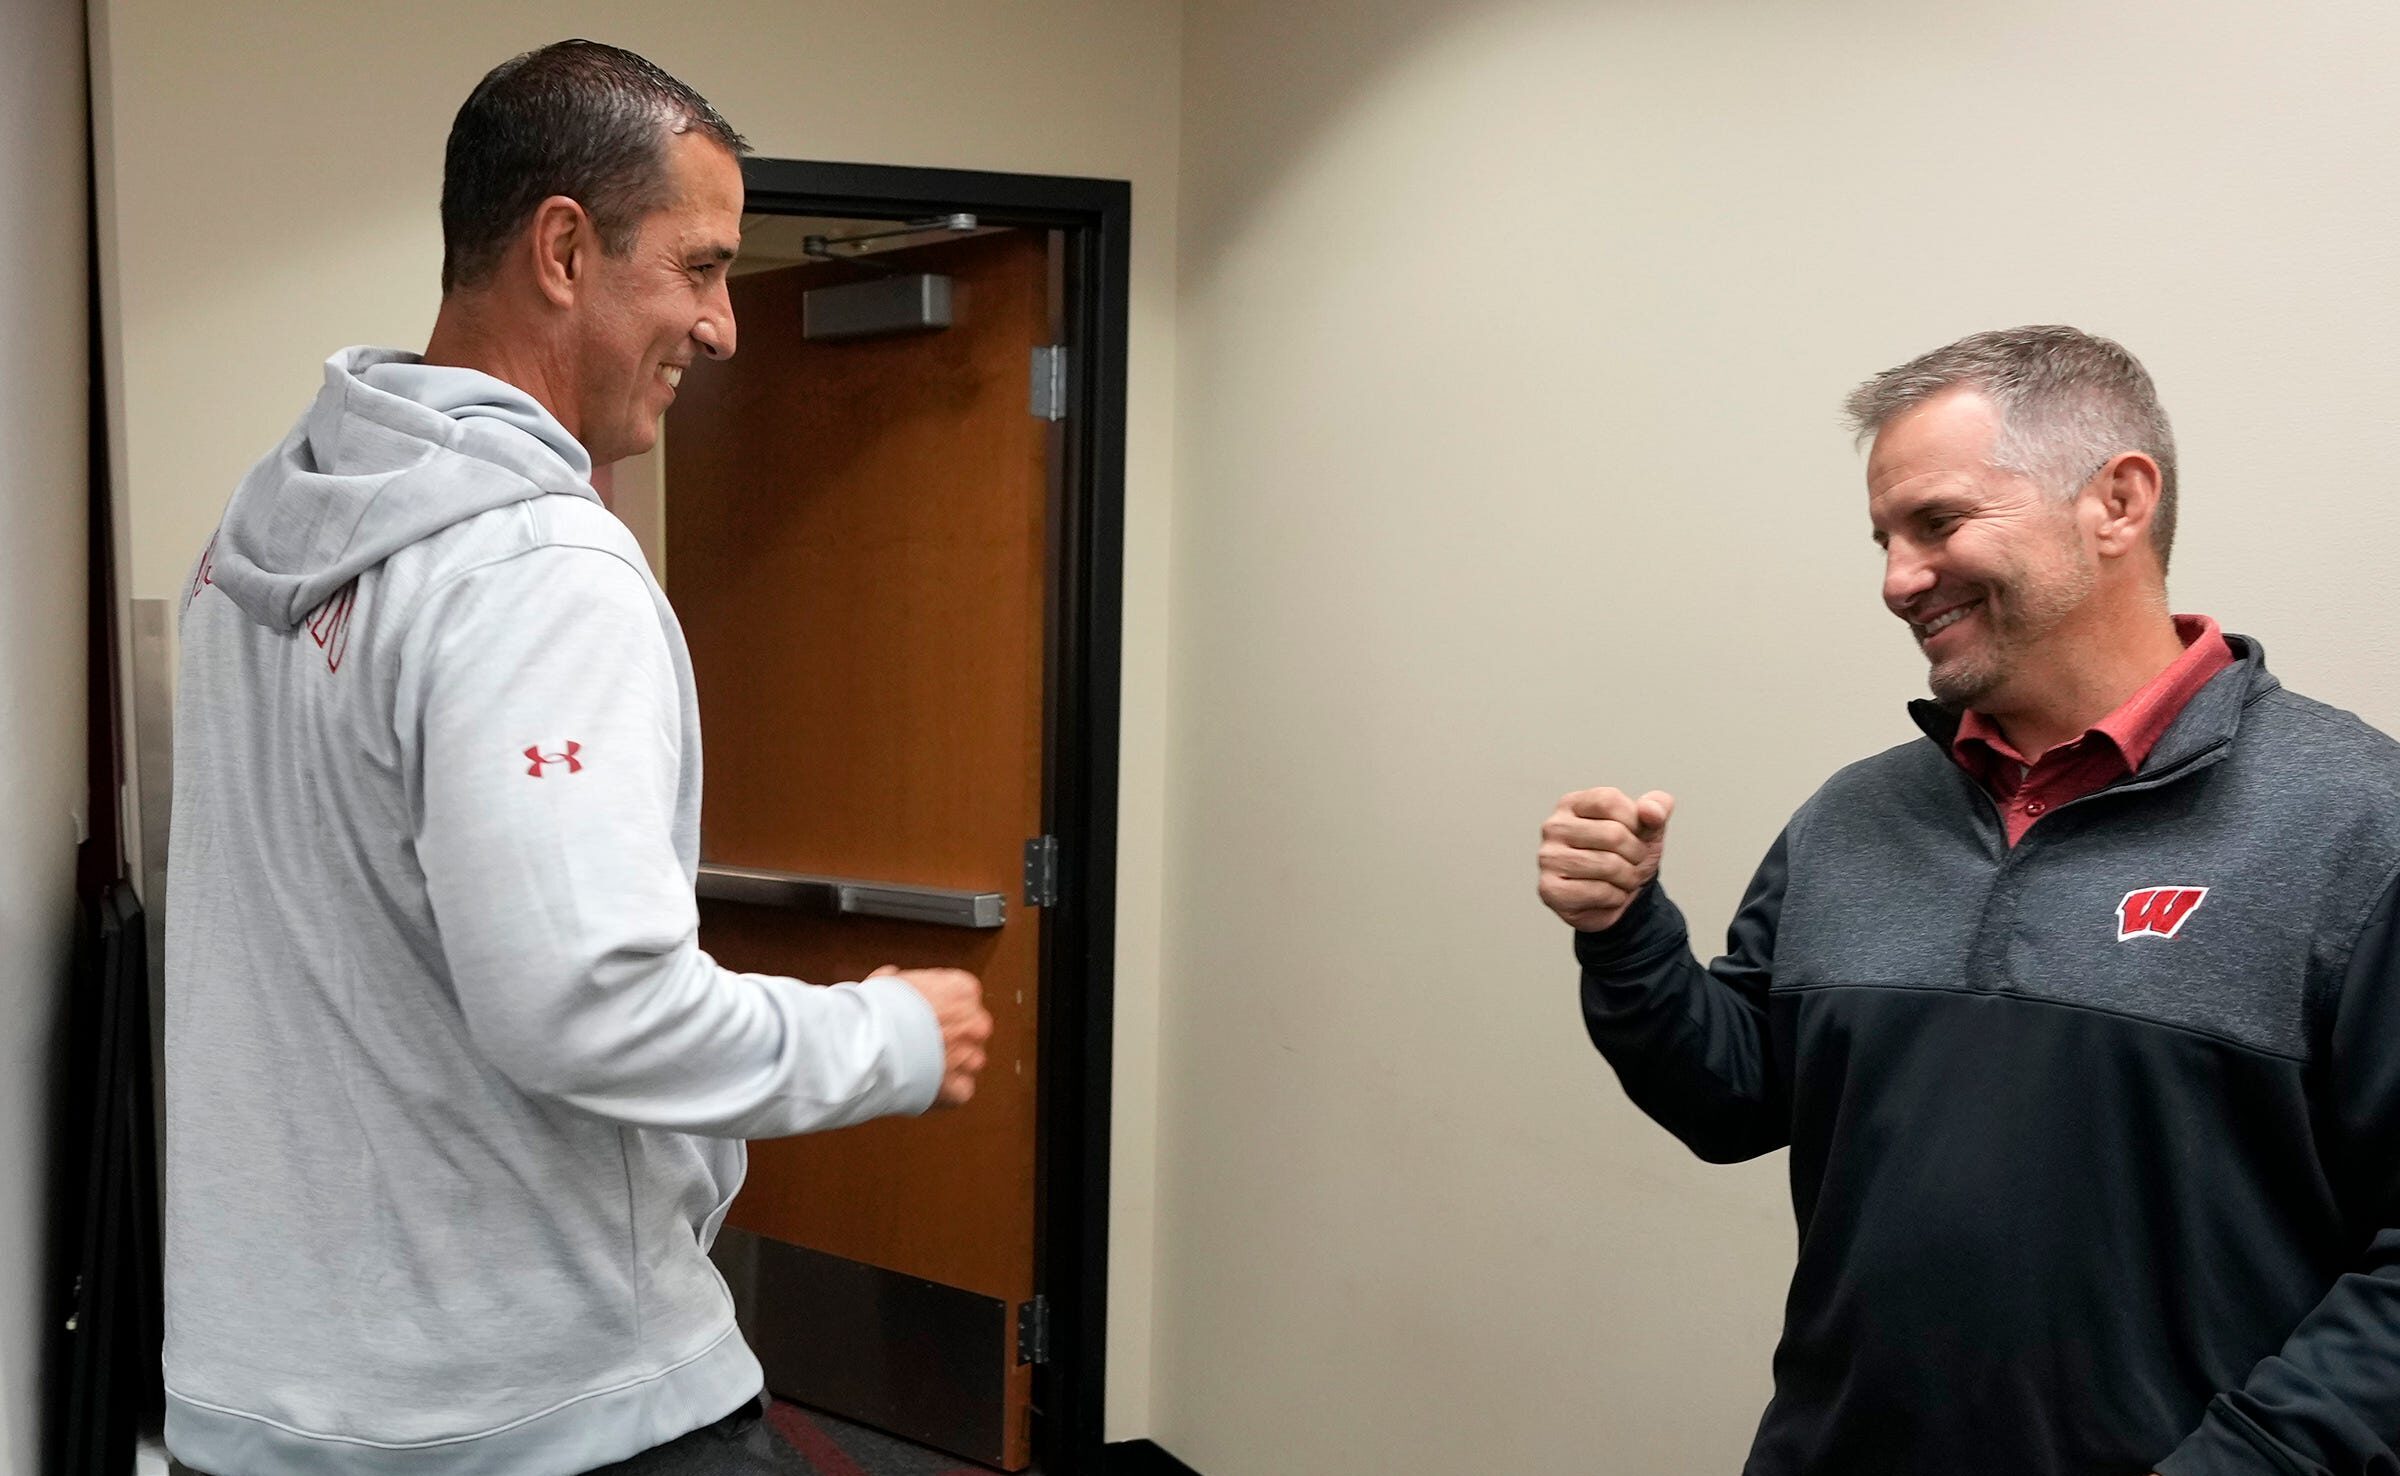 Wisconsin Badgers football coaches Luke Fickell and Mike Tressel